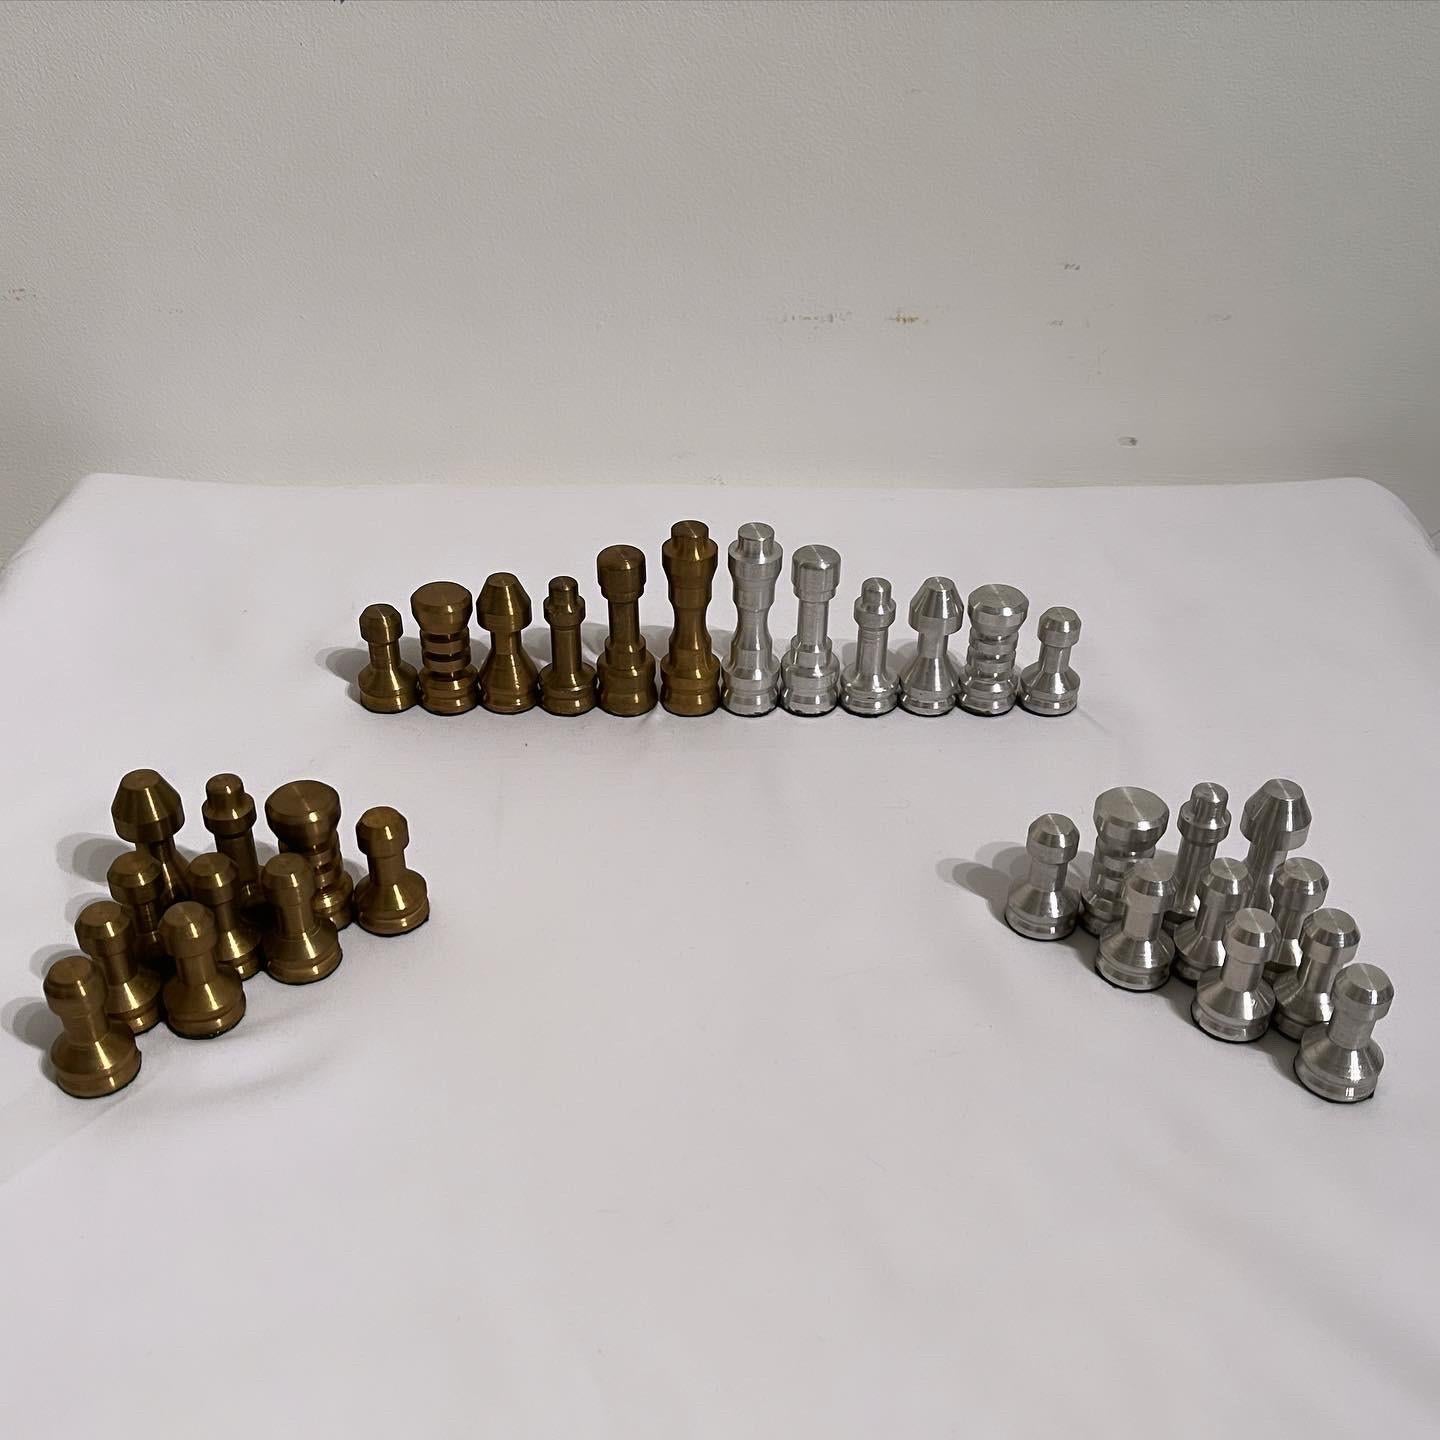 Vintage Aluminium and Brass Chess Pieces 
From around 1940s 

